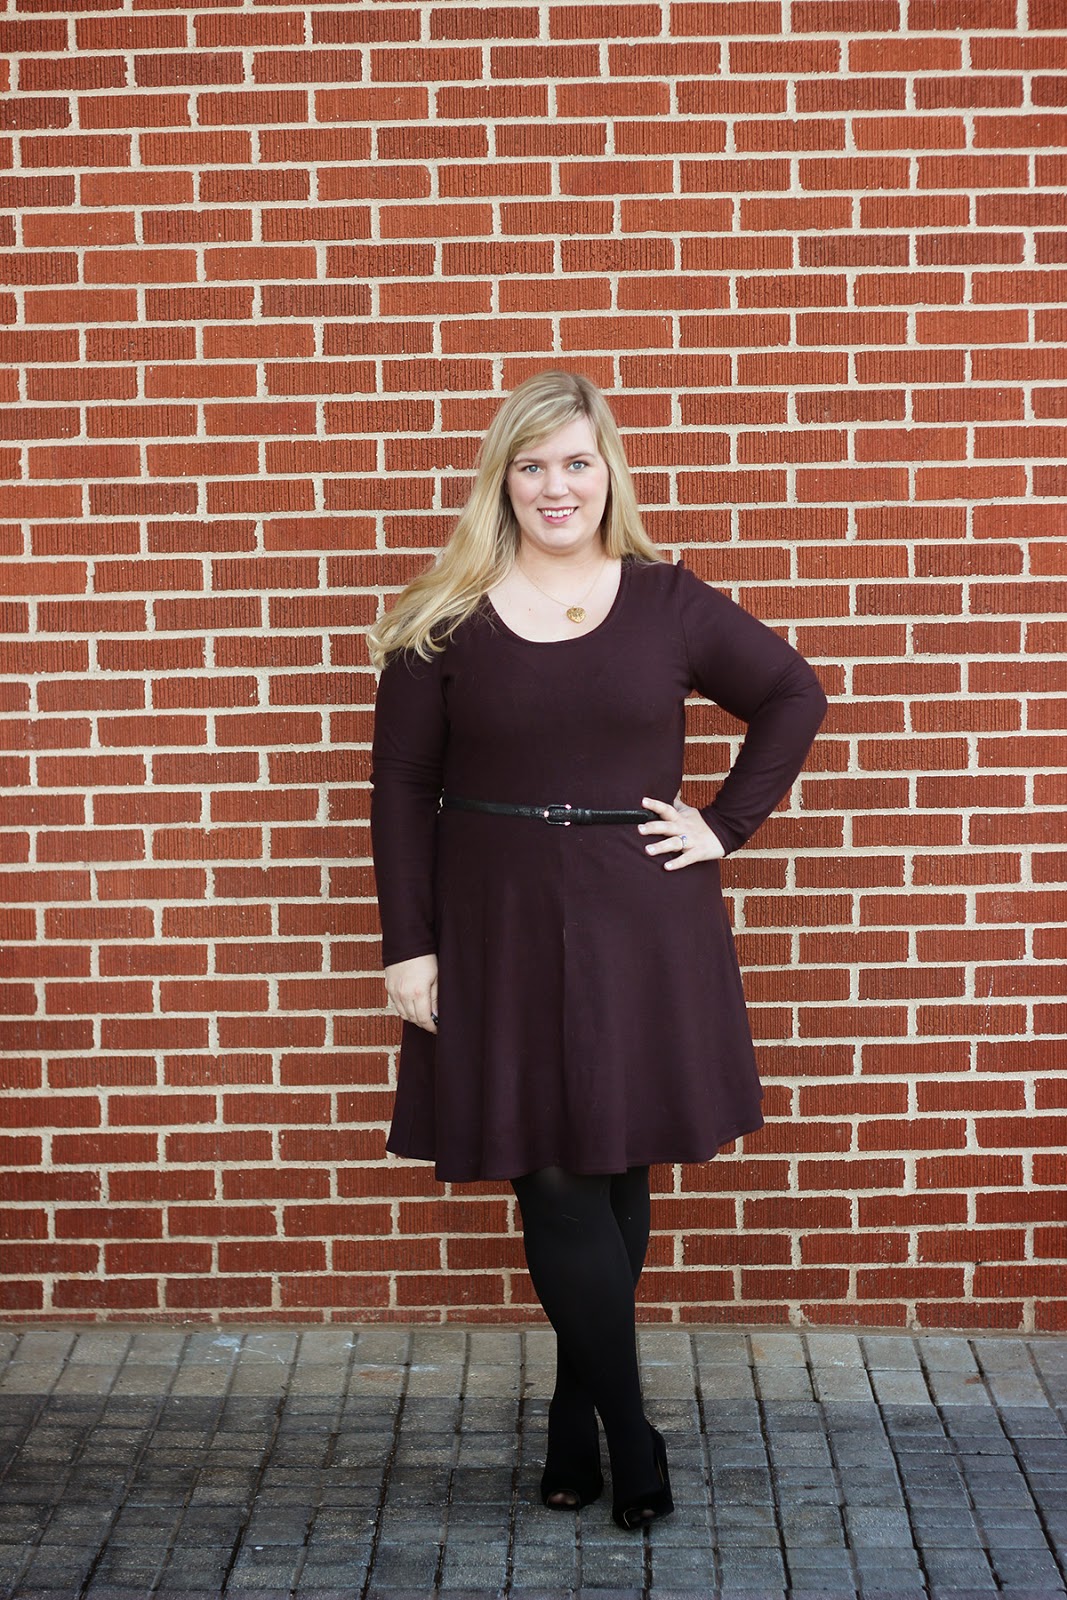 Jersey Dresses for Work - The Docket